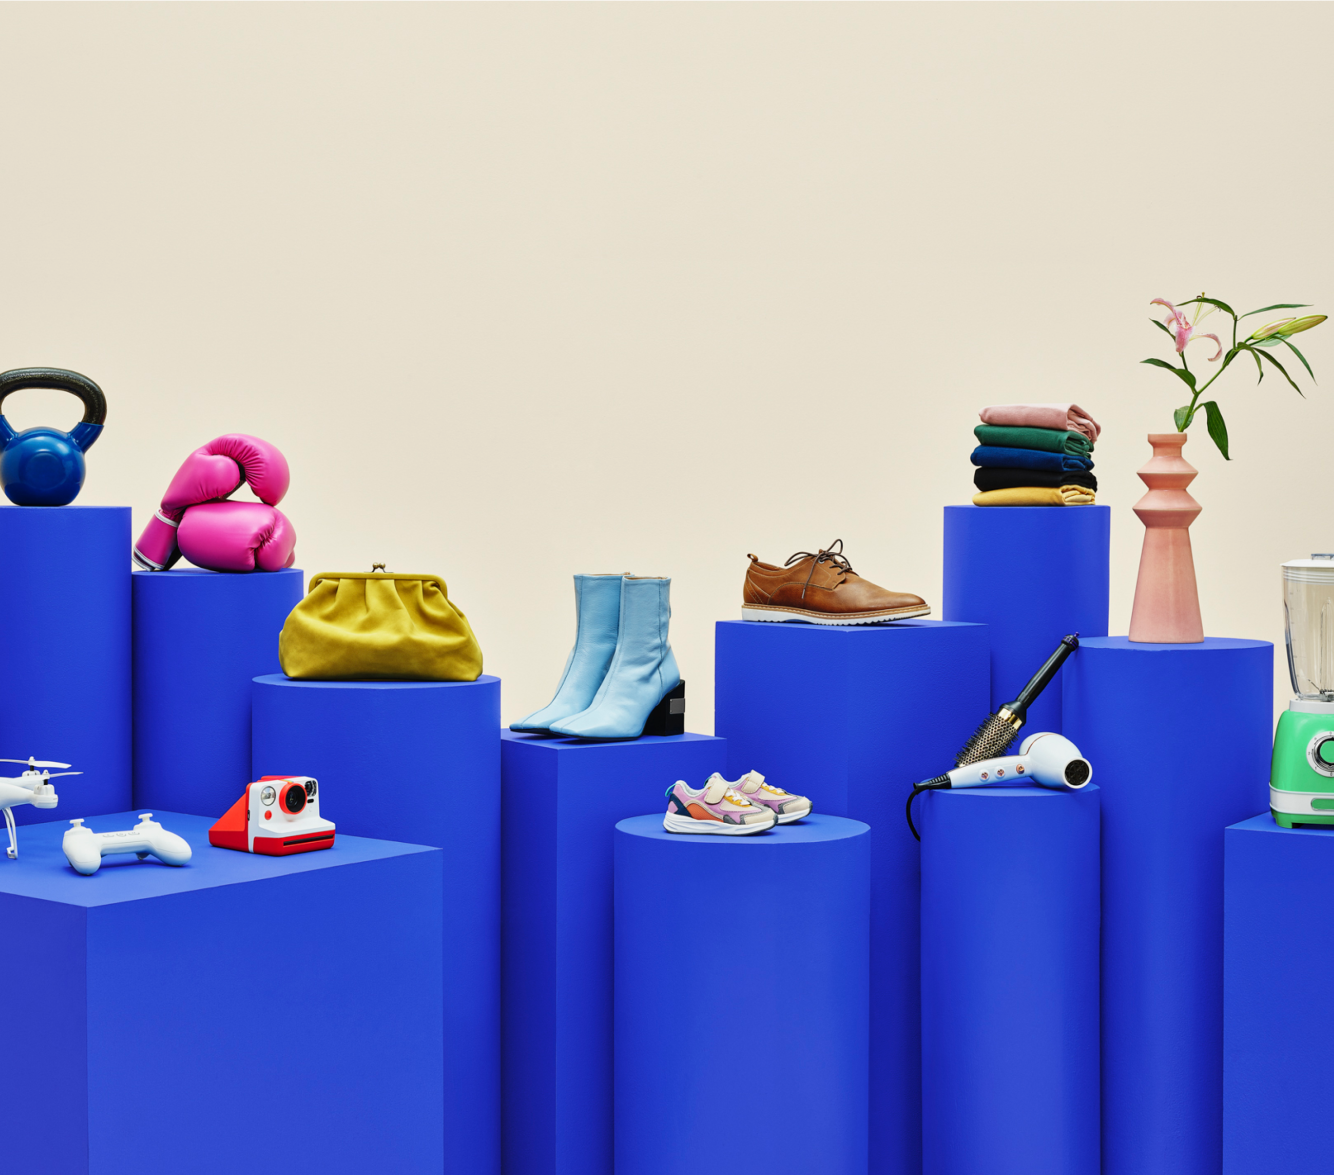 image of shoes and various objects on blue pedestals